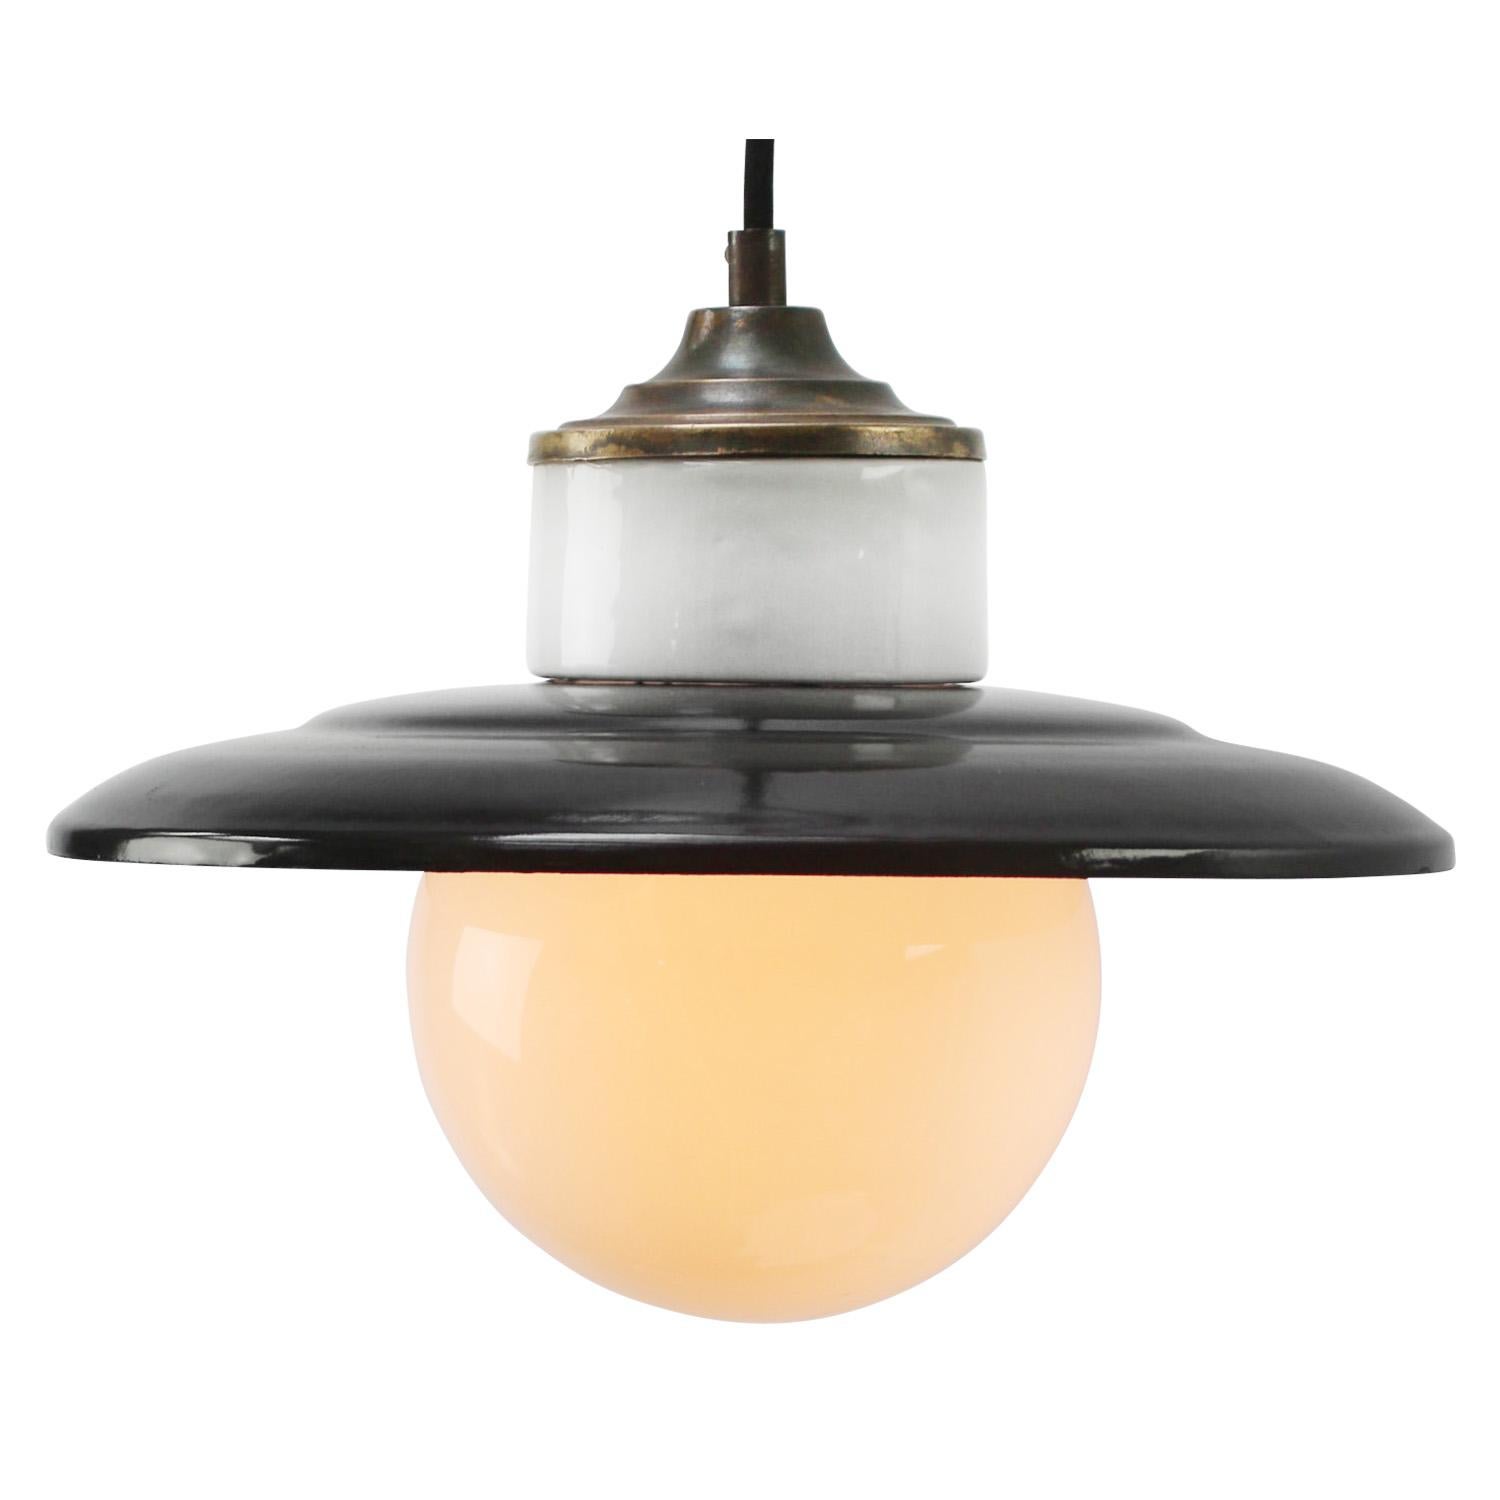 Porcelain industrial hanging lamp.
White porcelain, brass and white opaline milk glass.
Black enamel shade
2 conductors, no ground.

Weight: 1.70 kg / 3.7 lb

Priced per individual item. All lamps have been made suitable by international standards